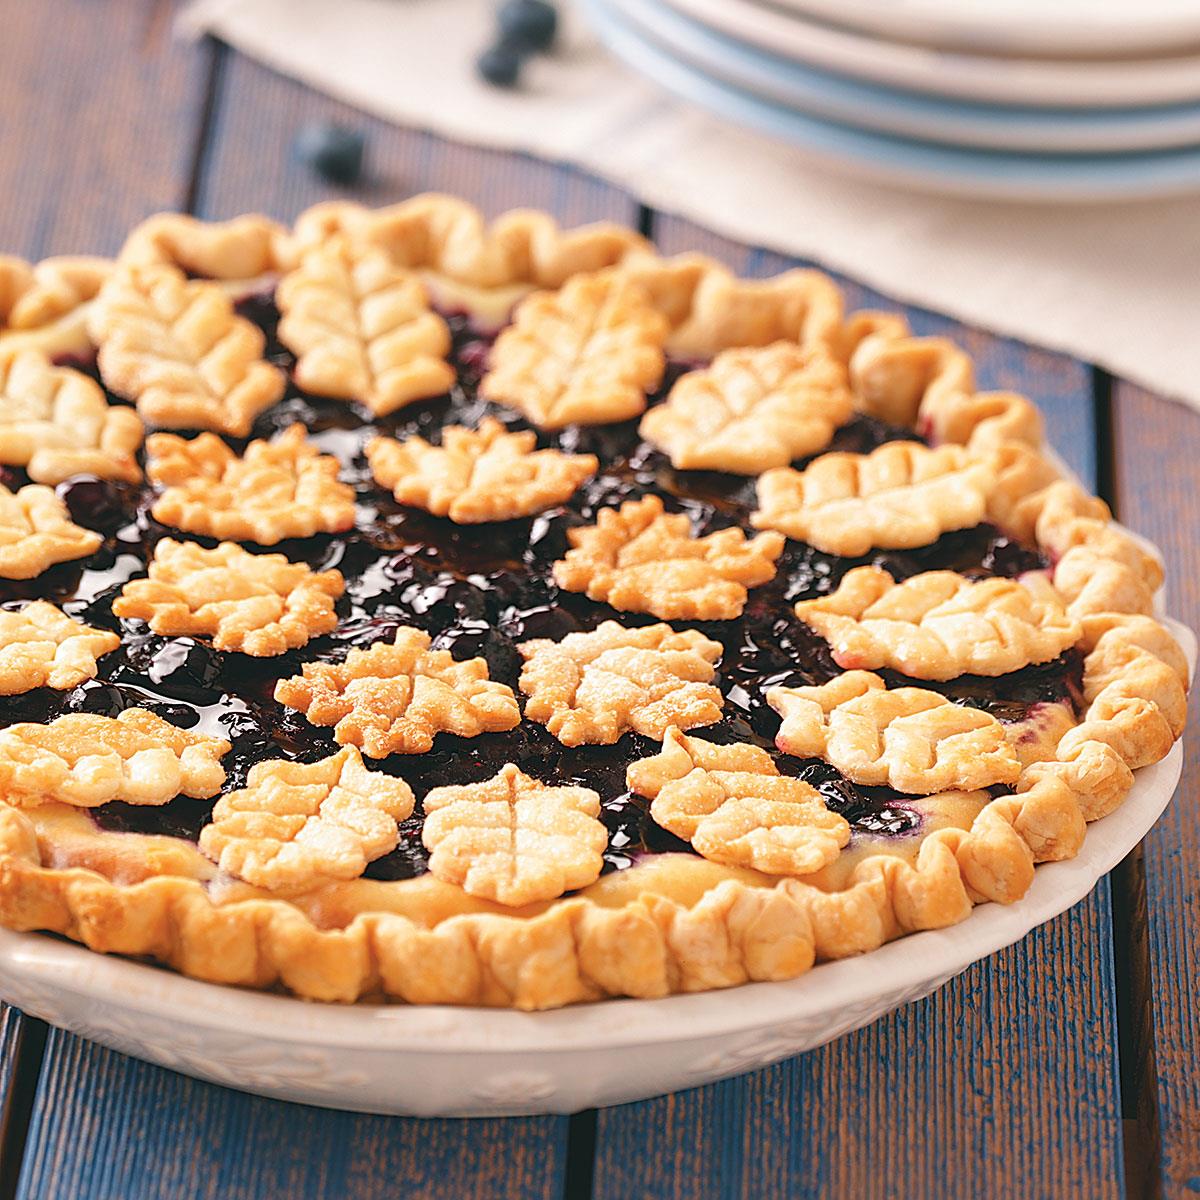 Cook In / Dine Out Blueberry Pie